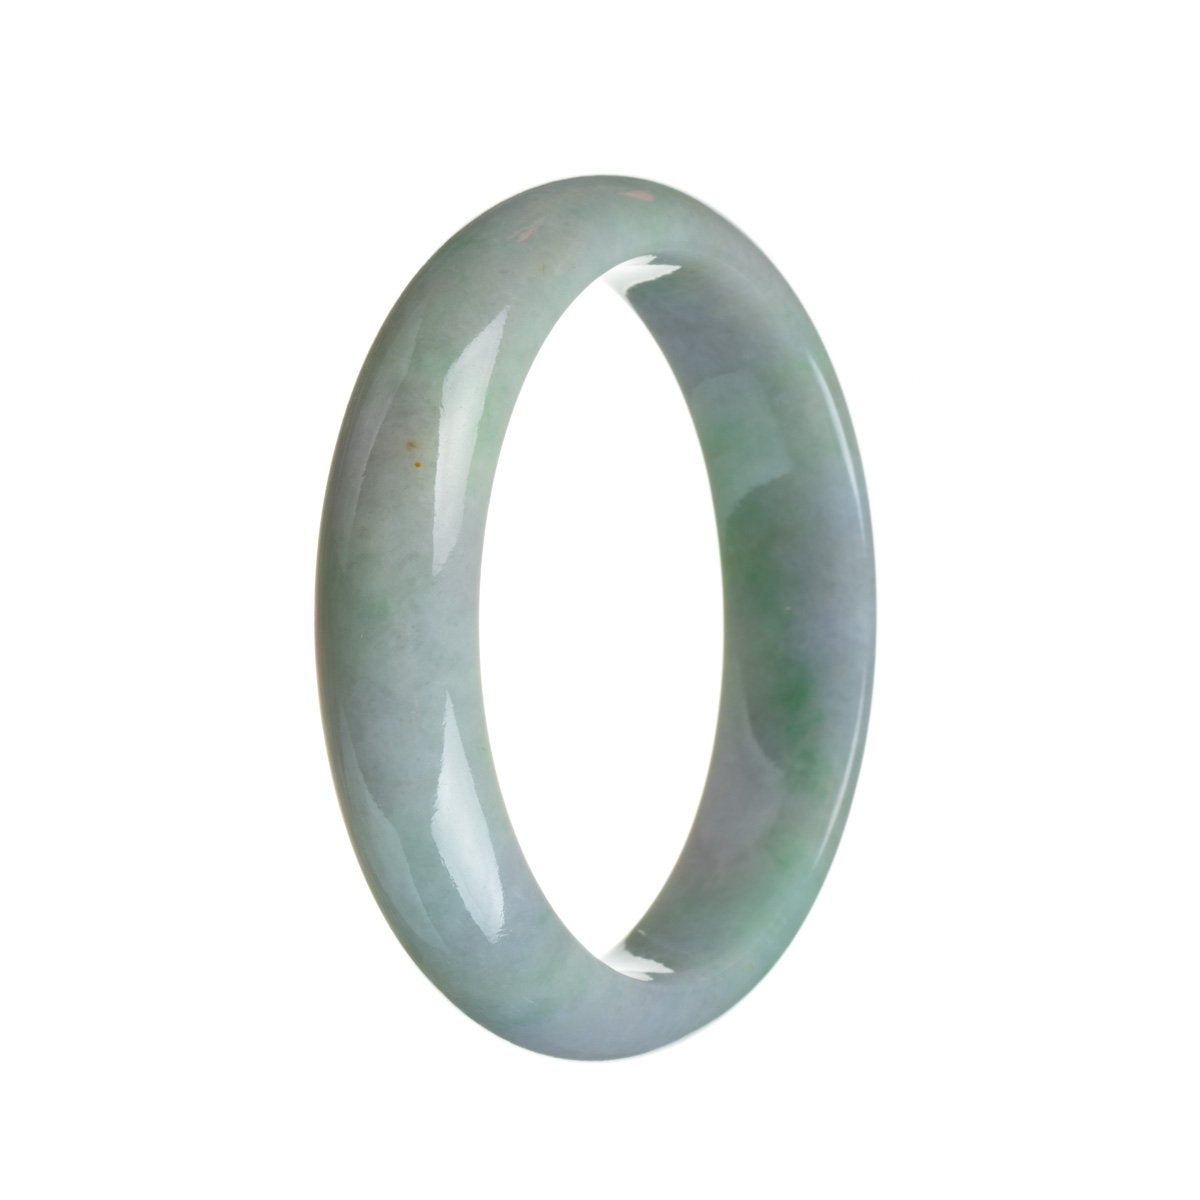 A lavender and green jade bangle bracelet with a traditional design, featuring a half moon shape and measuring 59mm in size.